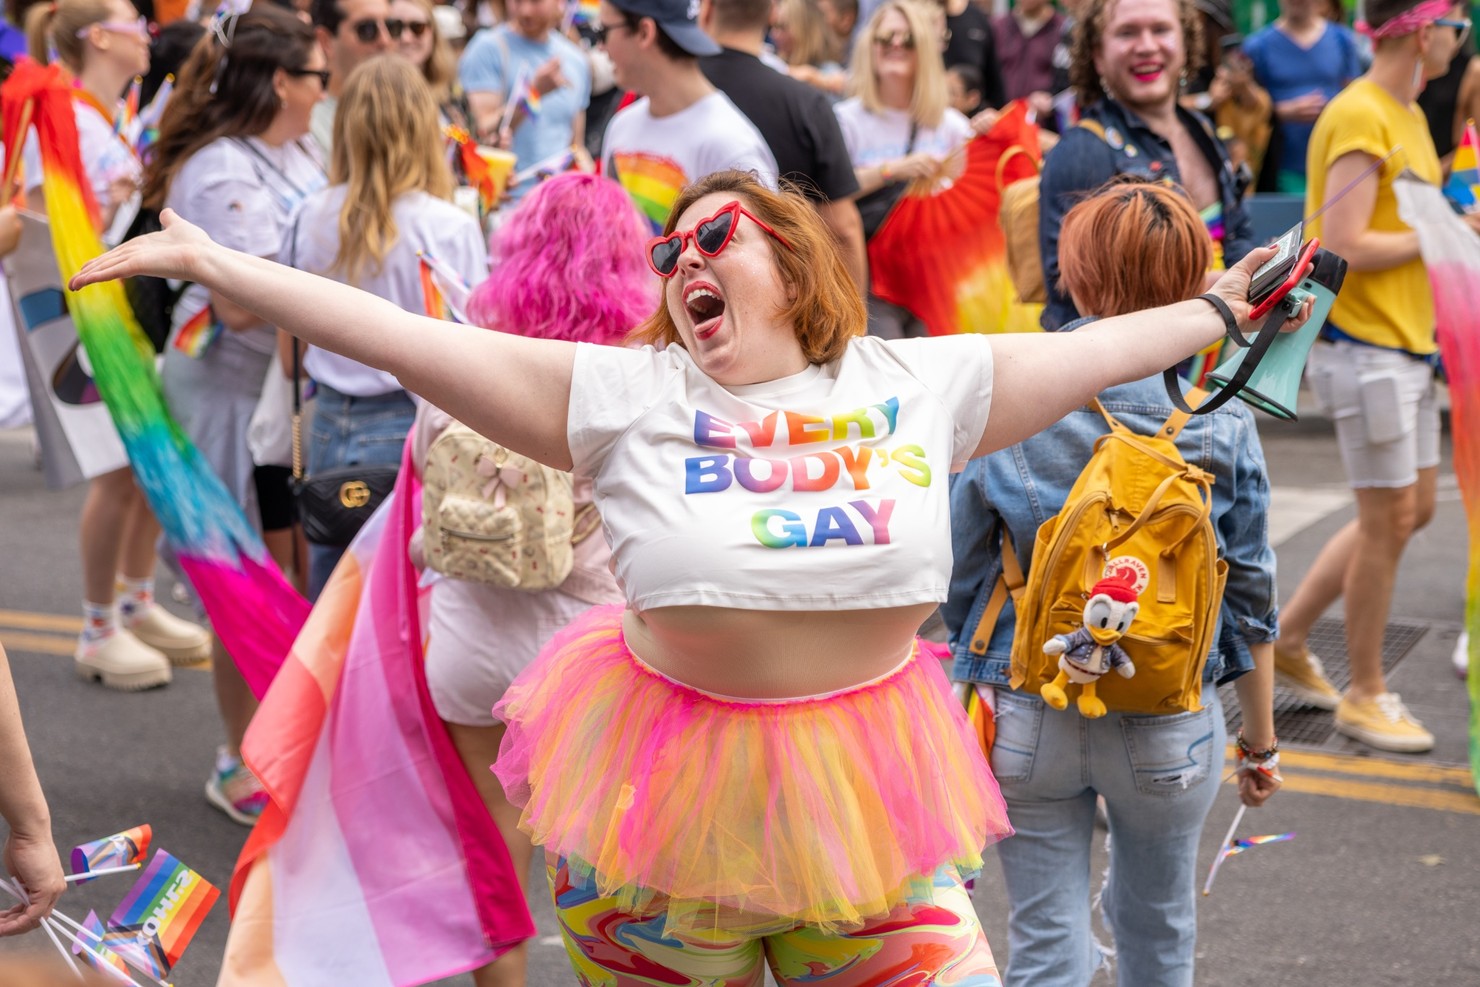 A happy person wearing heart-shaped sunglasses and a shirt that says 'Everybody's Gay'.